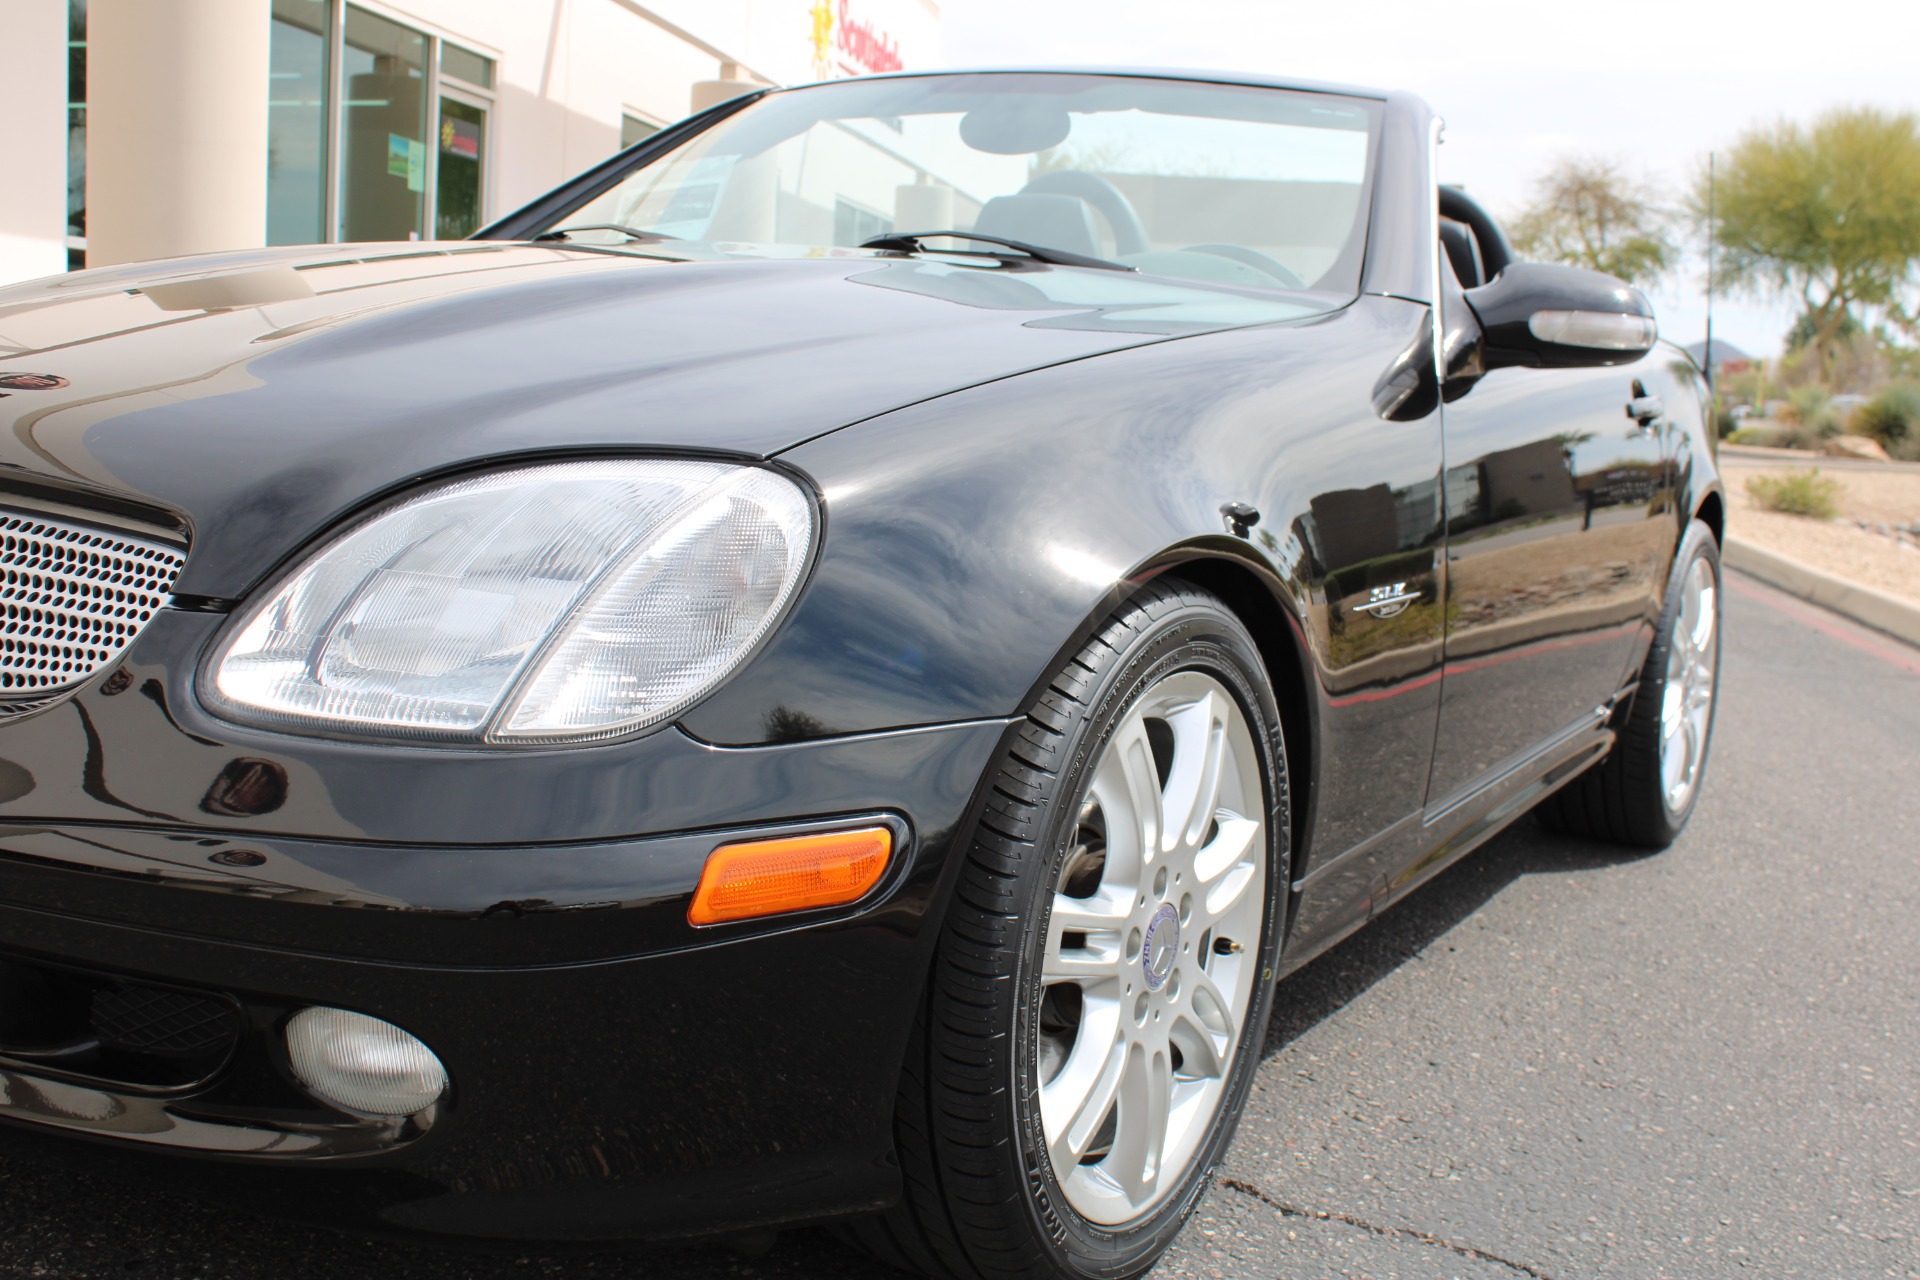 Used-2004-Mercedes-Benz-SLK-Class-SLK320-Special-Edition-Chevelle